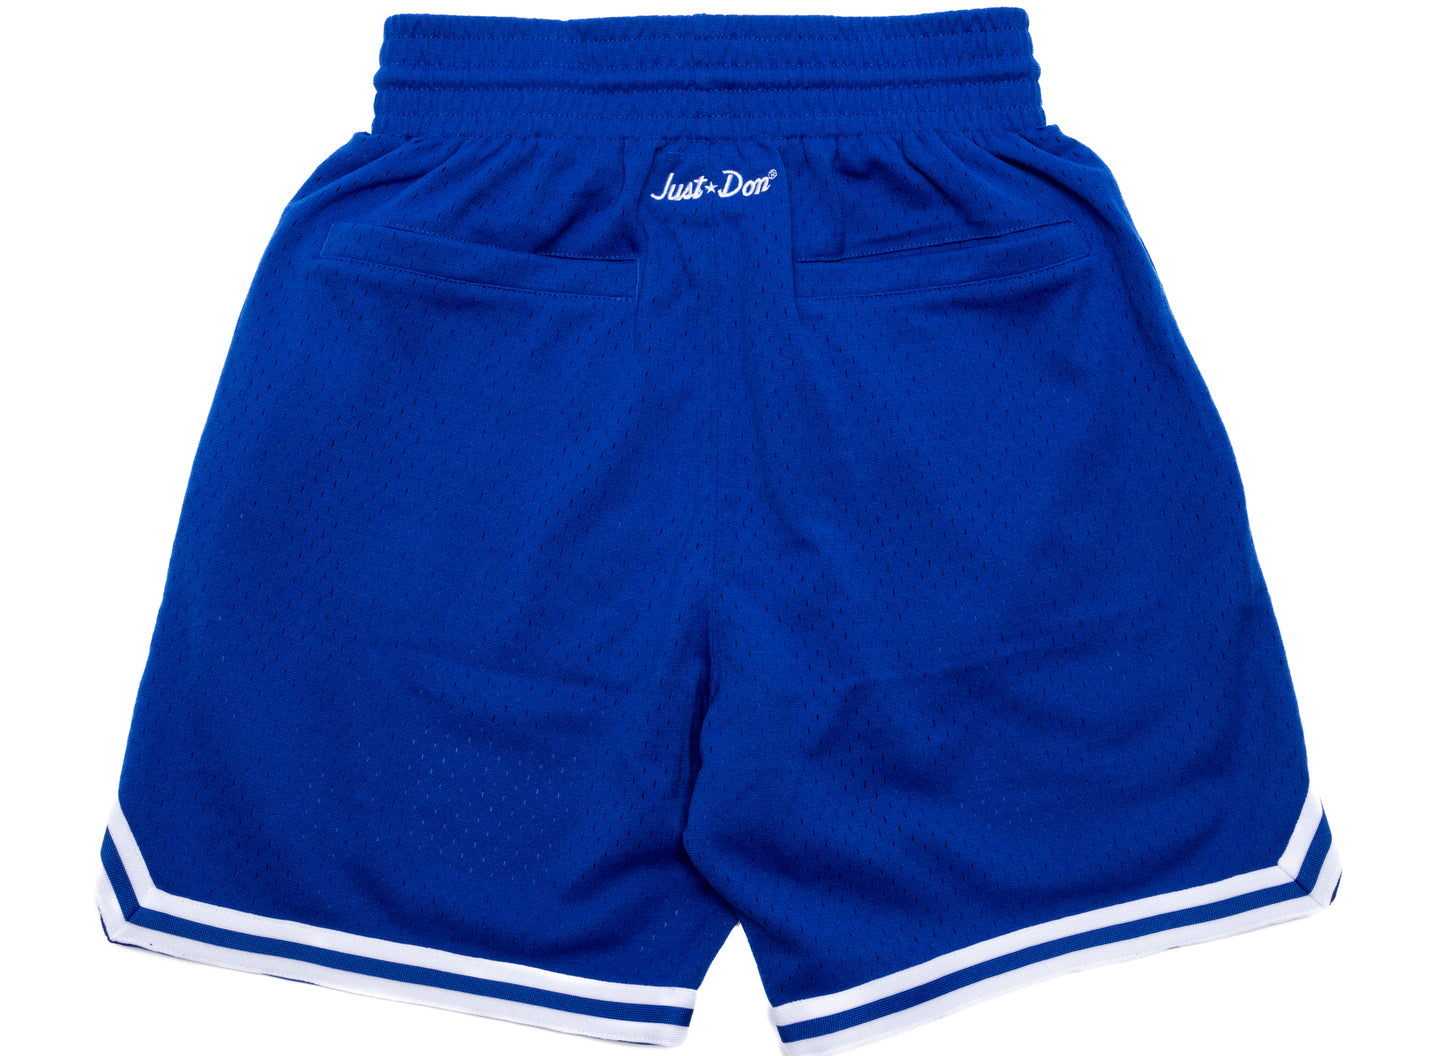 Mitchell & Ness MLB Just Don Dodgers Practice Shorts xld